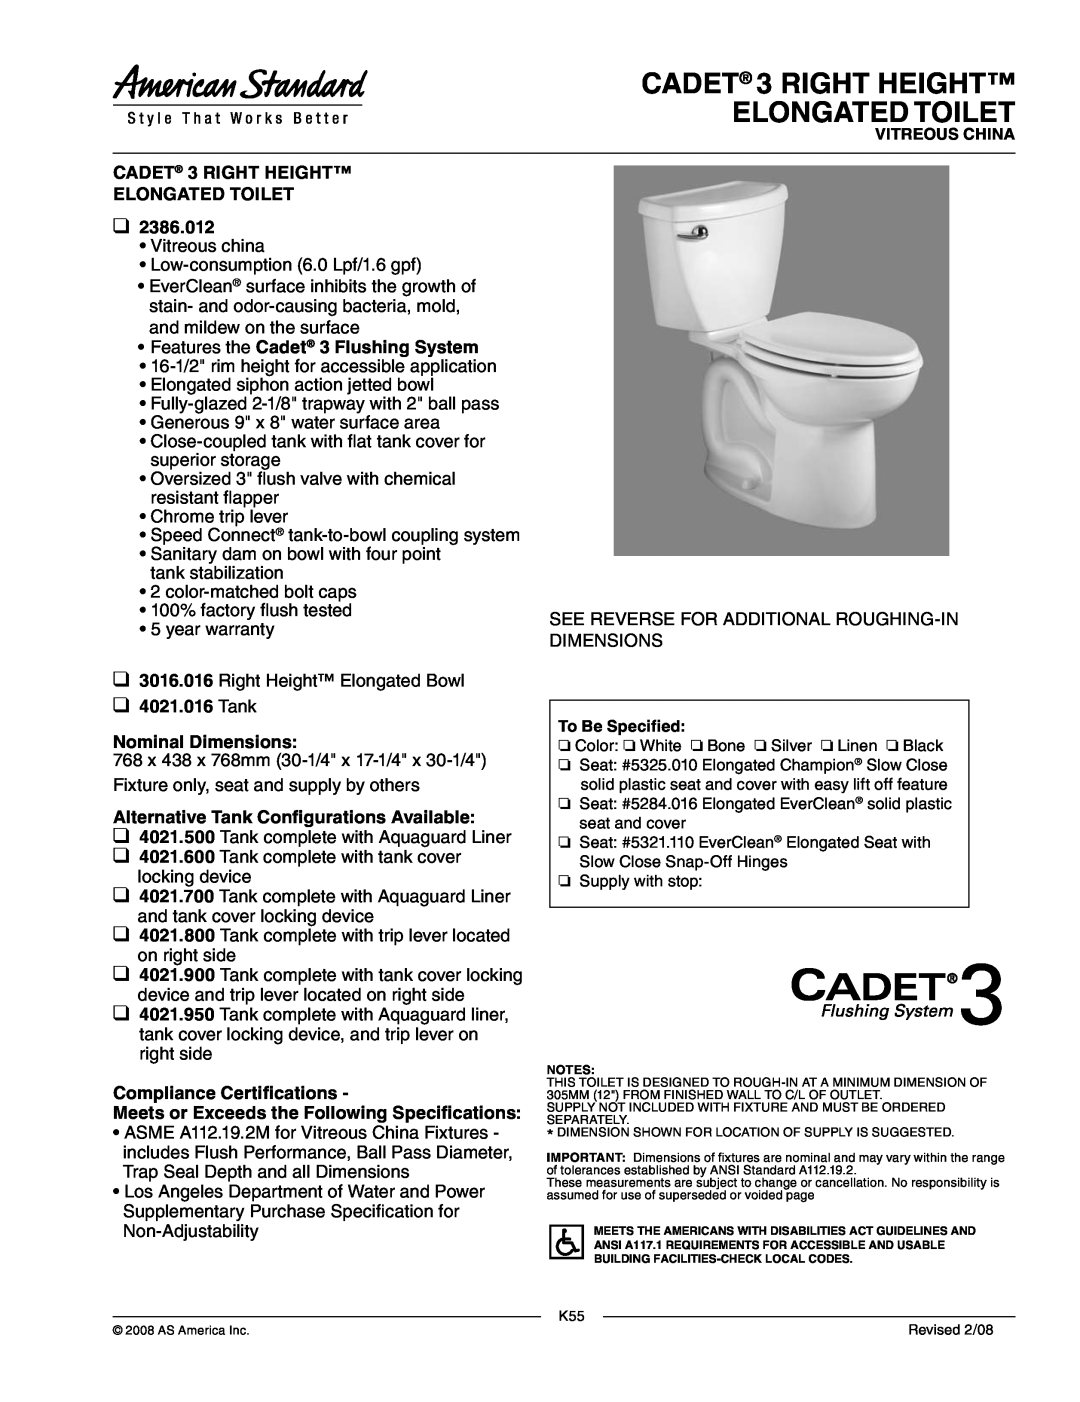 American Standard 4021.600 warranty CADET 3 RIGHT HEIGHT ELONGATED TOILET, Features the Cadet 3 Flushing System, Tank 